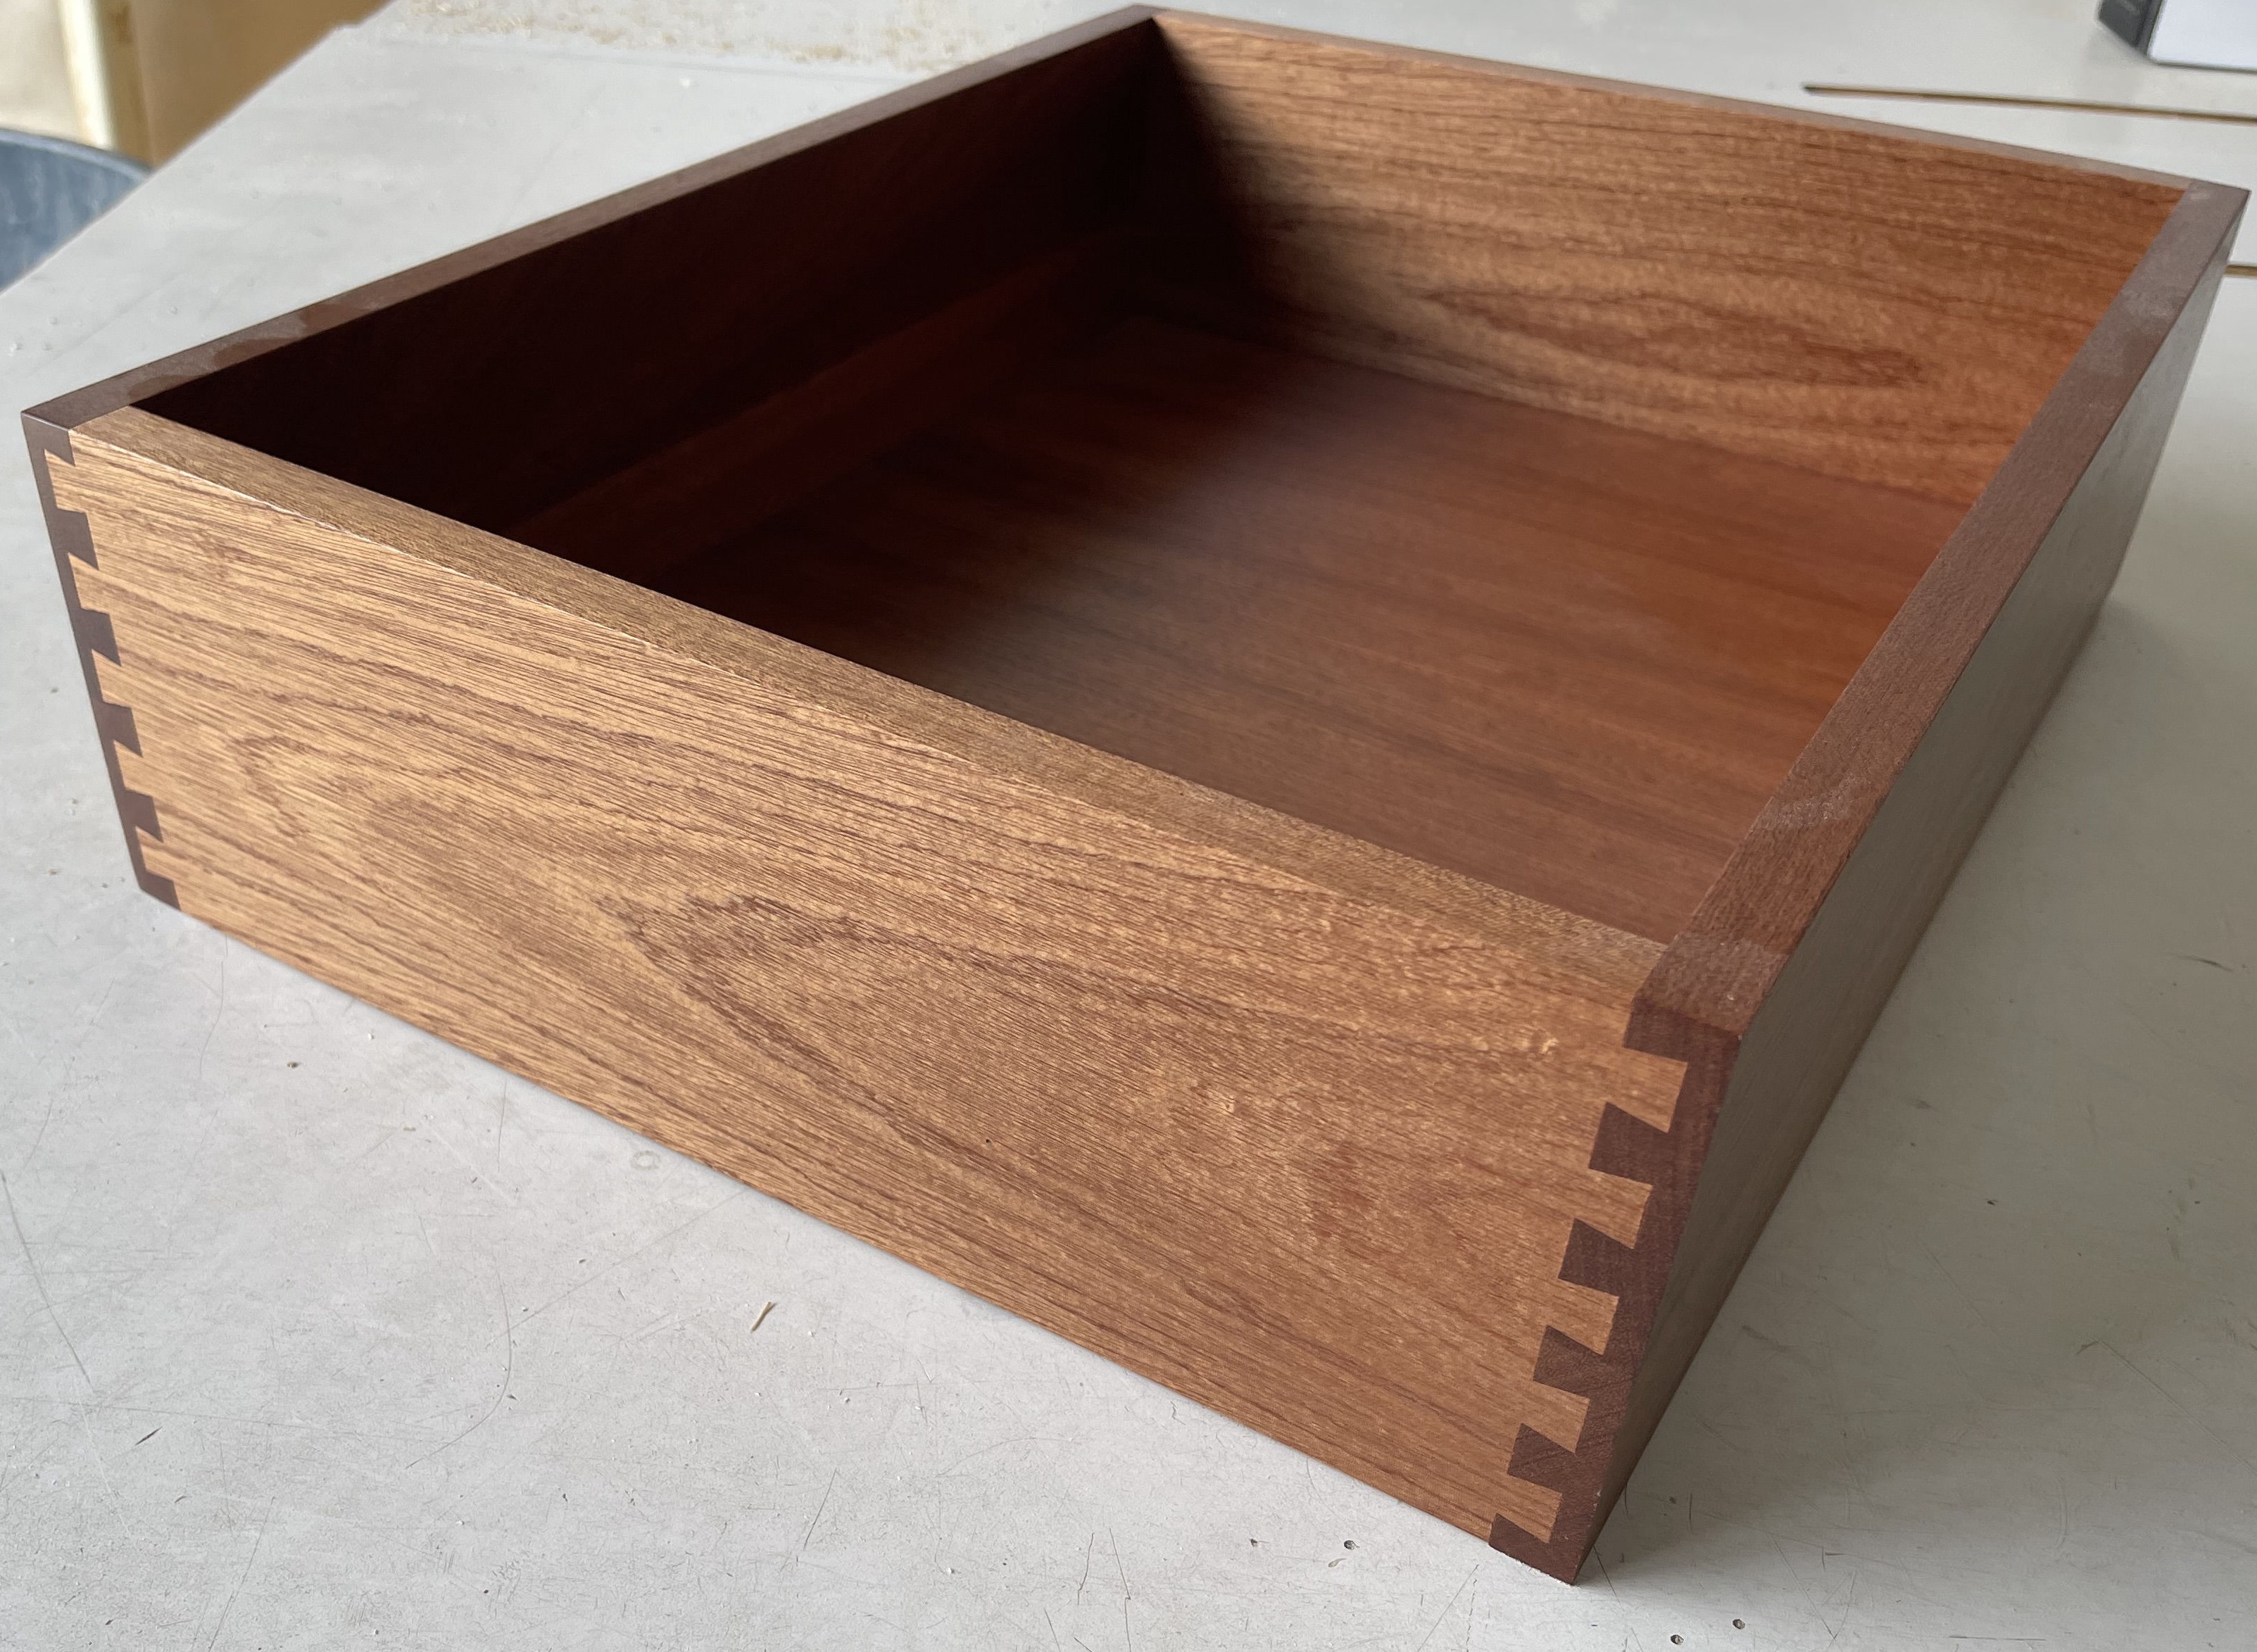 Manufactured by South Florida Dovetailed Drawers - Premium Sapele Mahogany Drawers 5/8 Inch Thick 